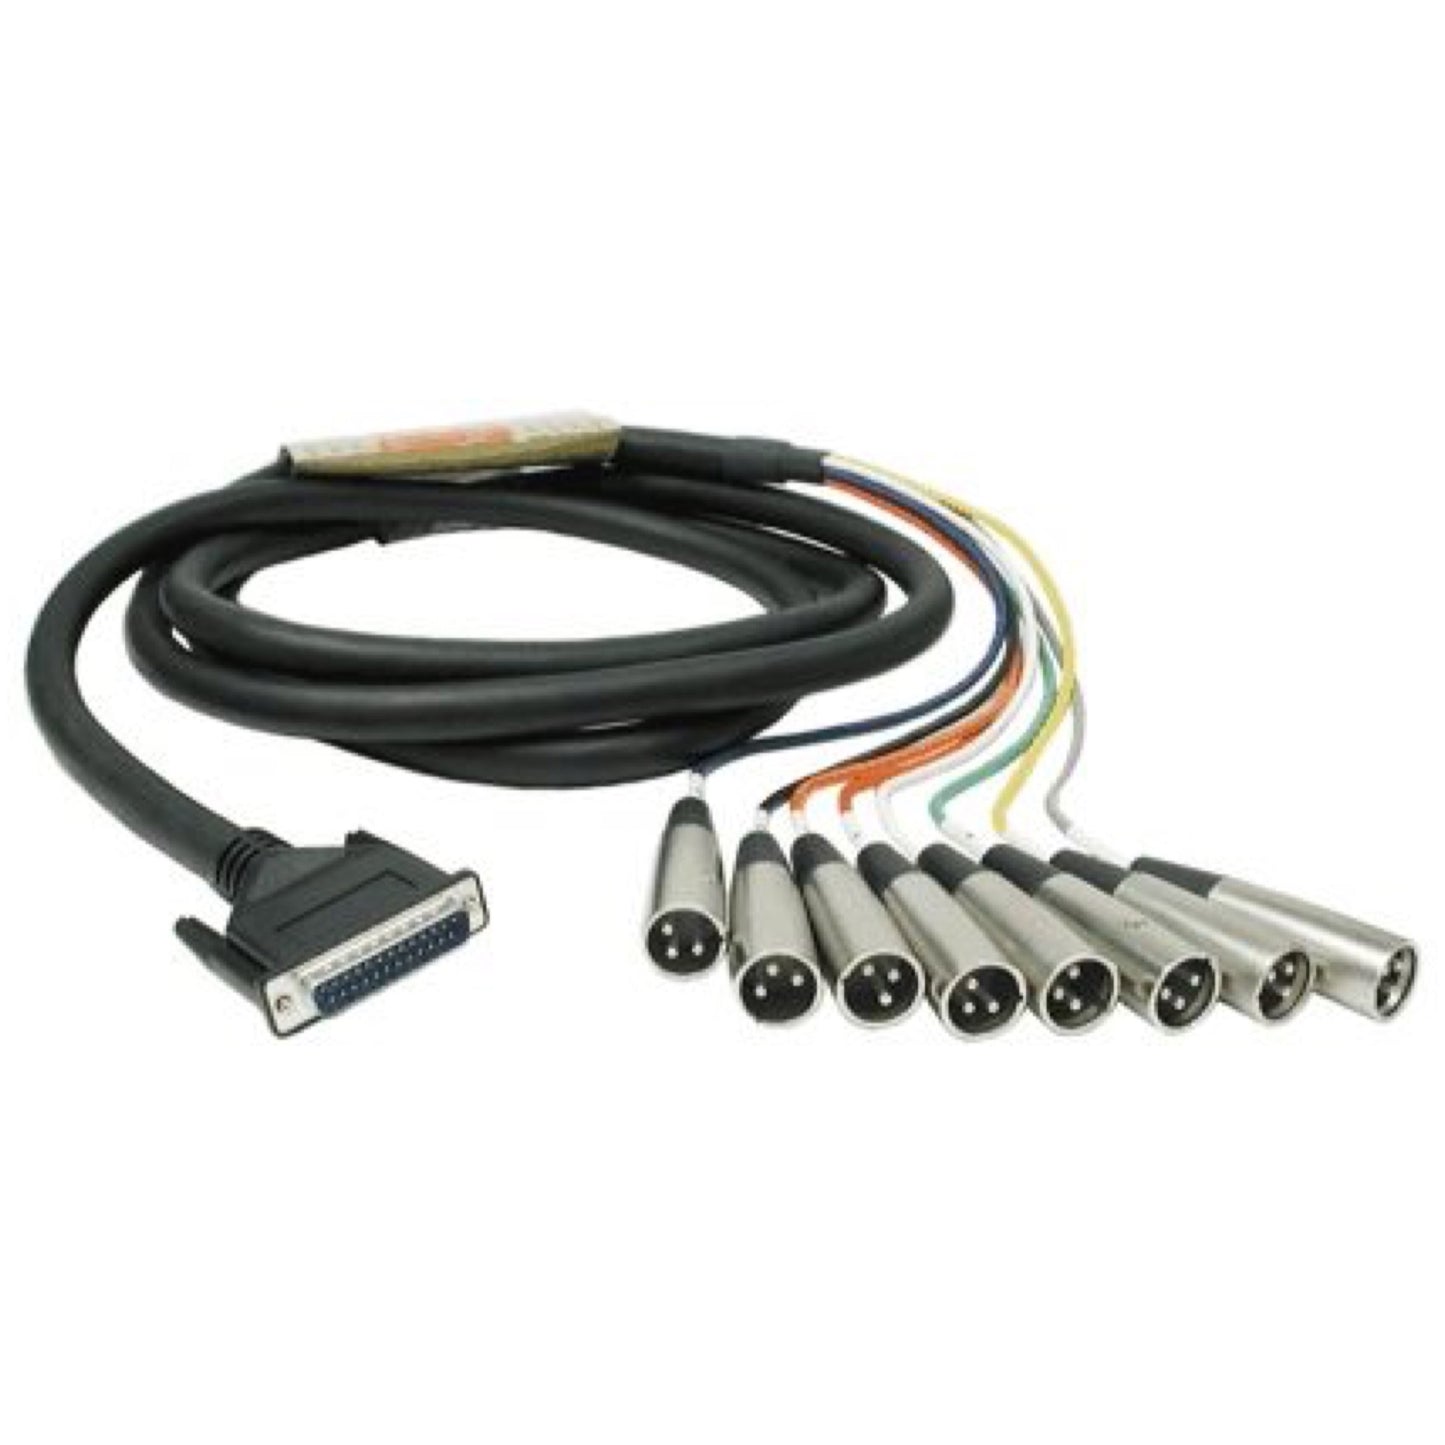 Hosa DTM800 Snake Cable (25-Pin D-Sub to XLR Male x 8), 9.84 Foot, 3m